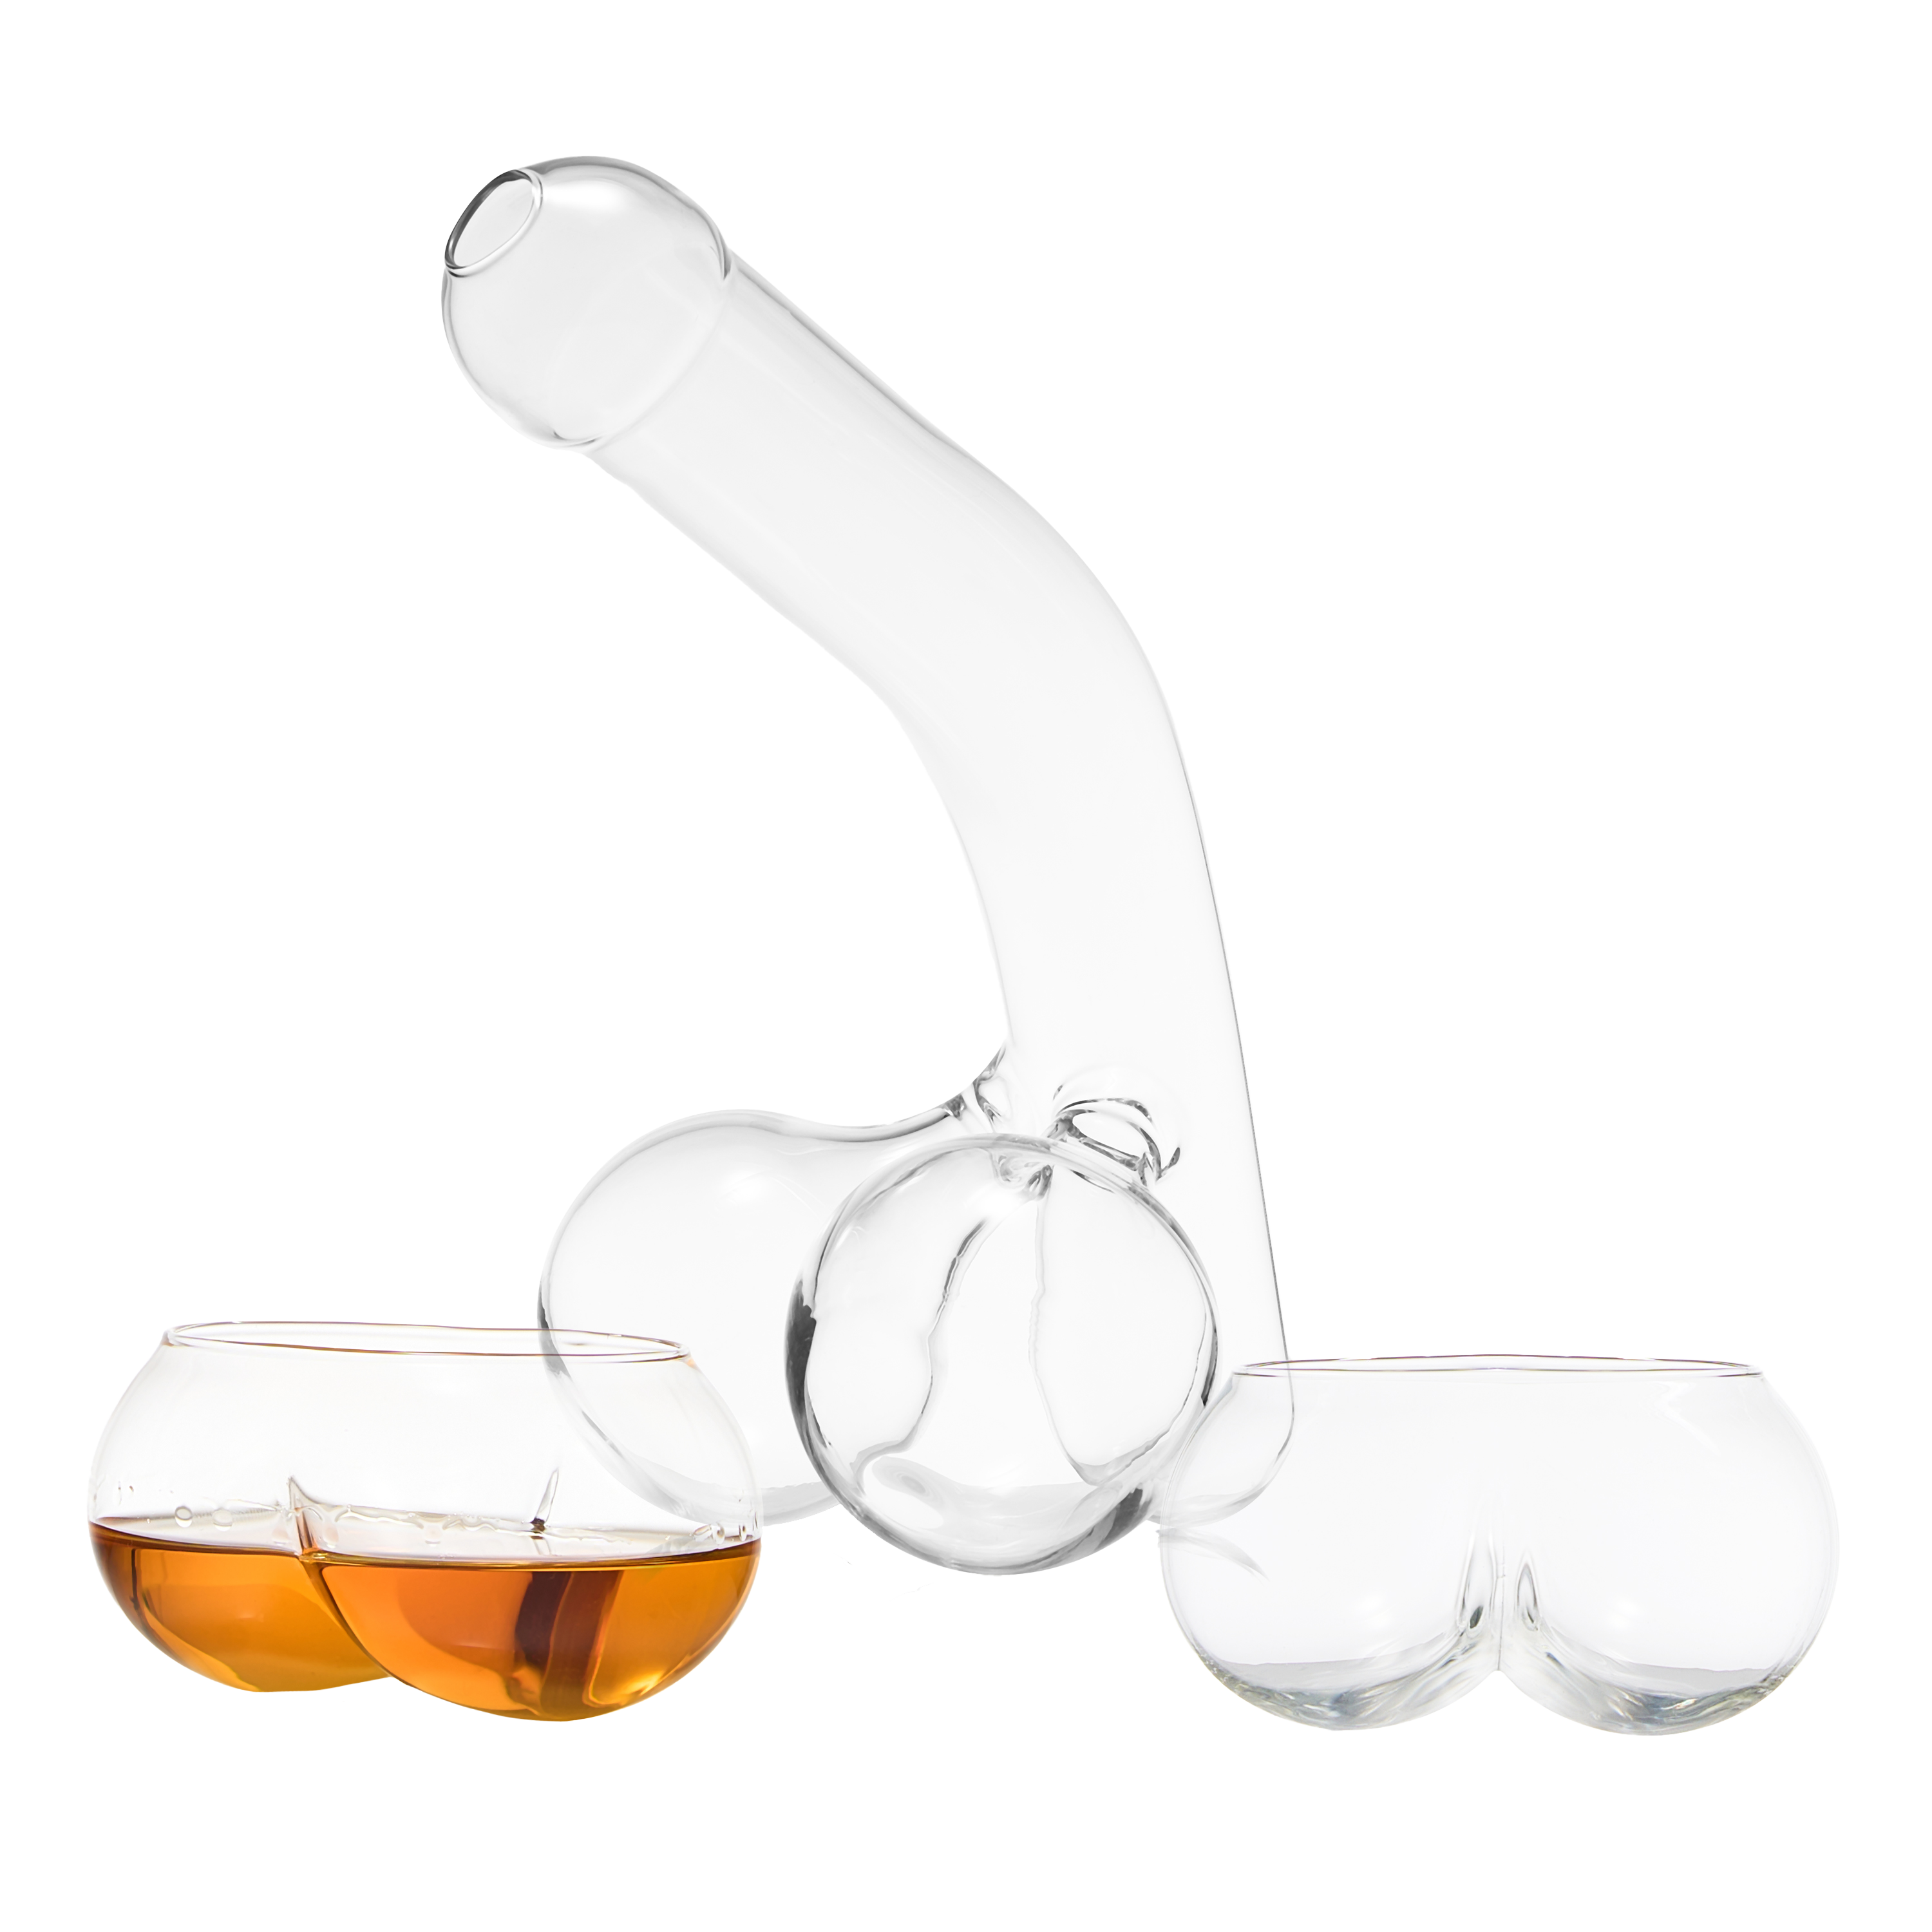 Penis Whiskey Decanter Bottle With Two Whiskey Glasses - Unique & Funny  Glass Container for Scotch, Tequila, Brandy, Rum, Bourbon & Other Drinks 